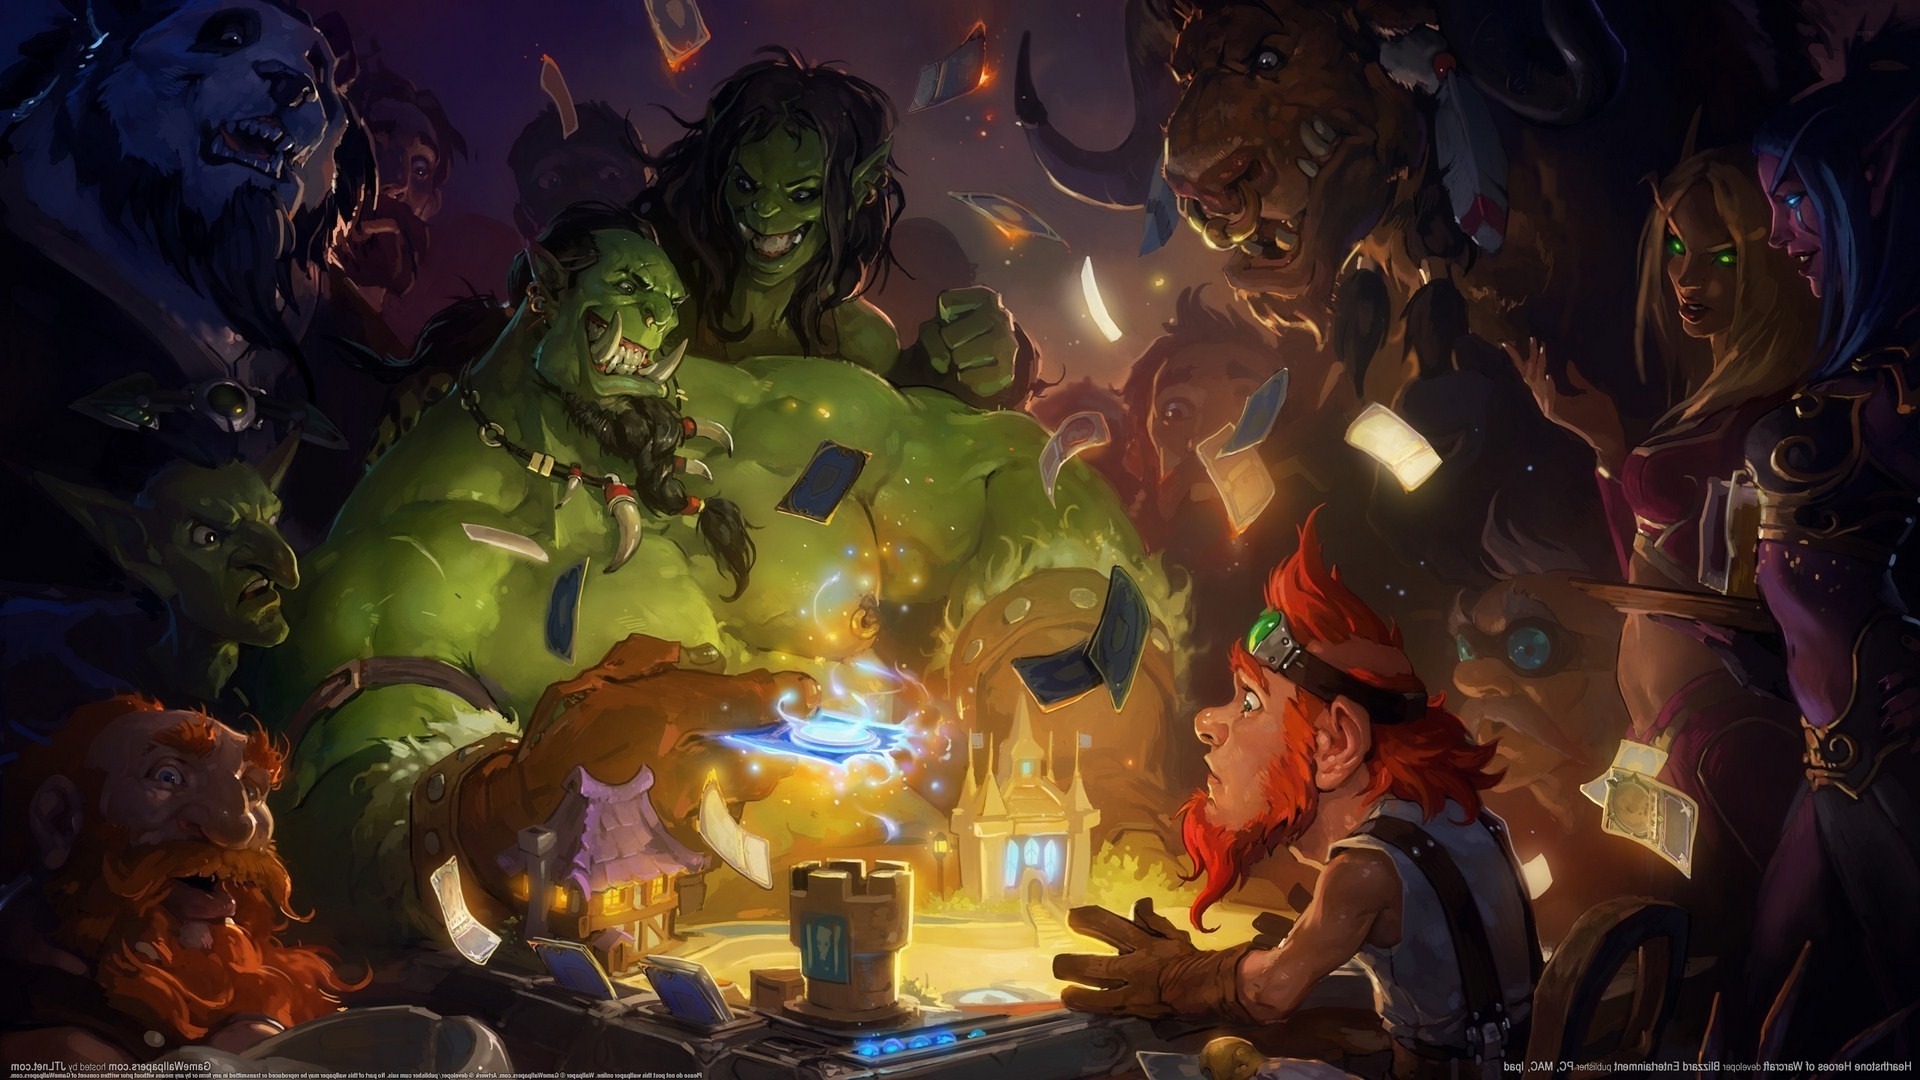 hearthstone wallpaper,action adventure game,pc game,fictional character,screenshot,fiction